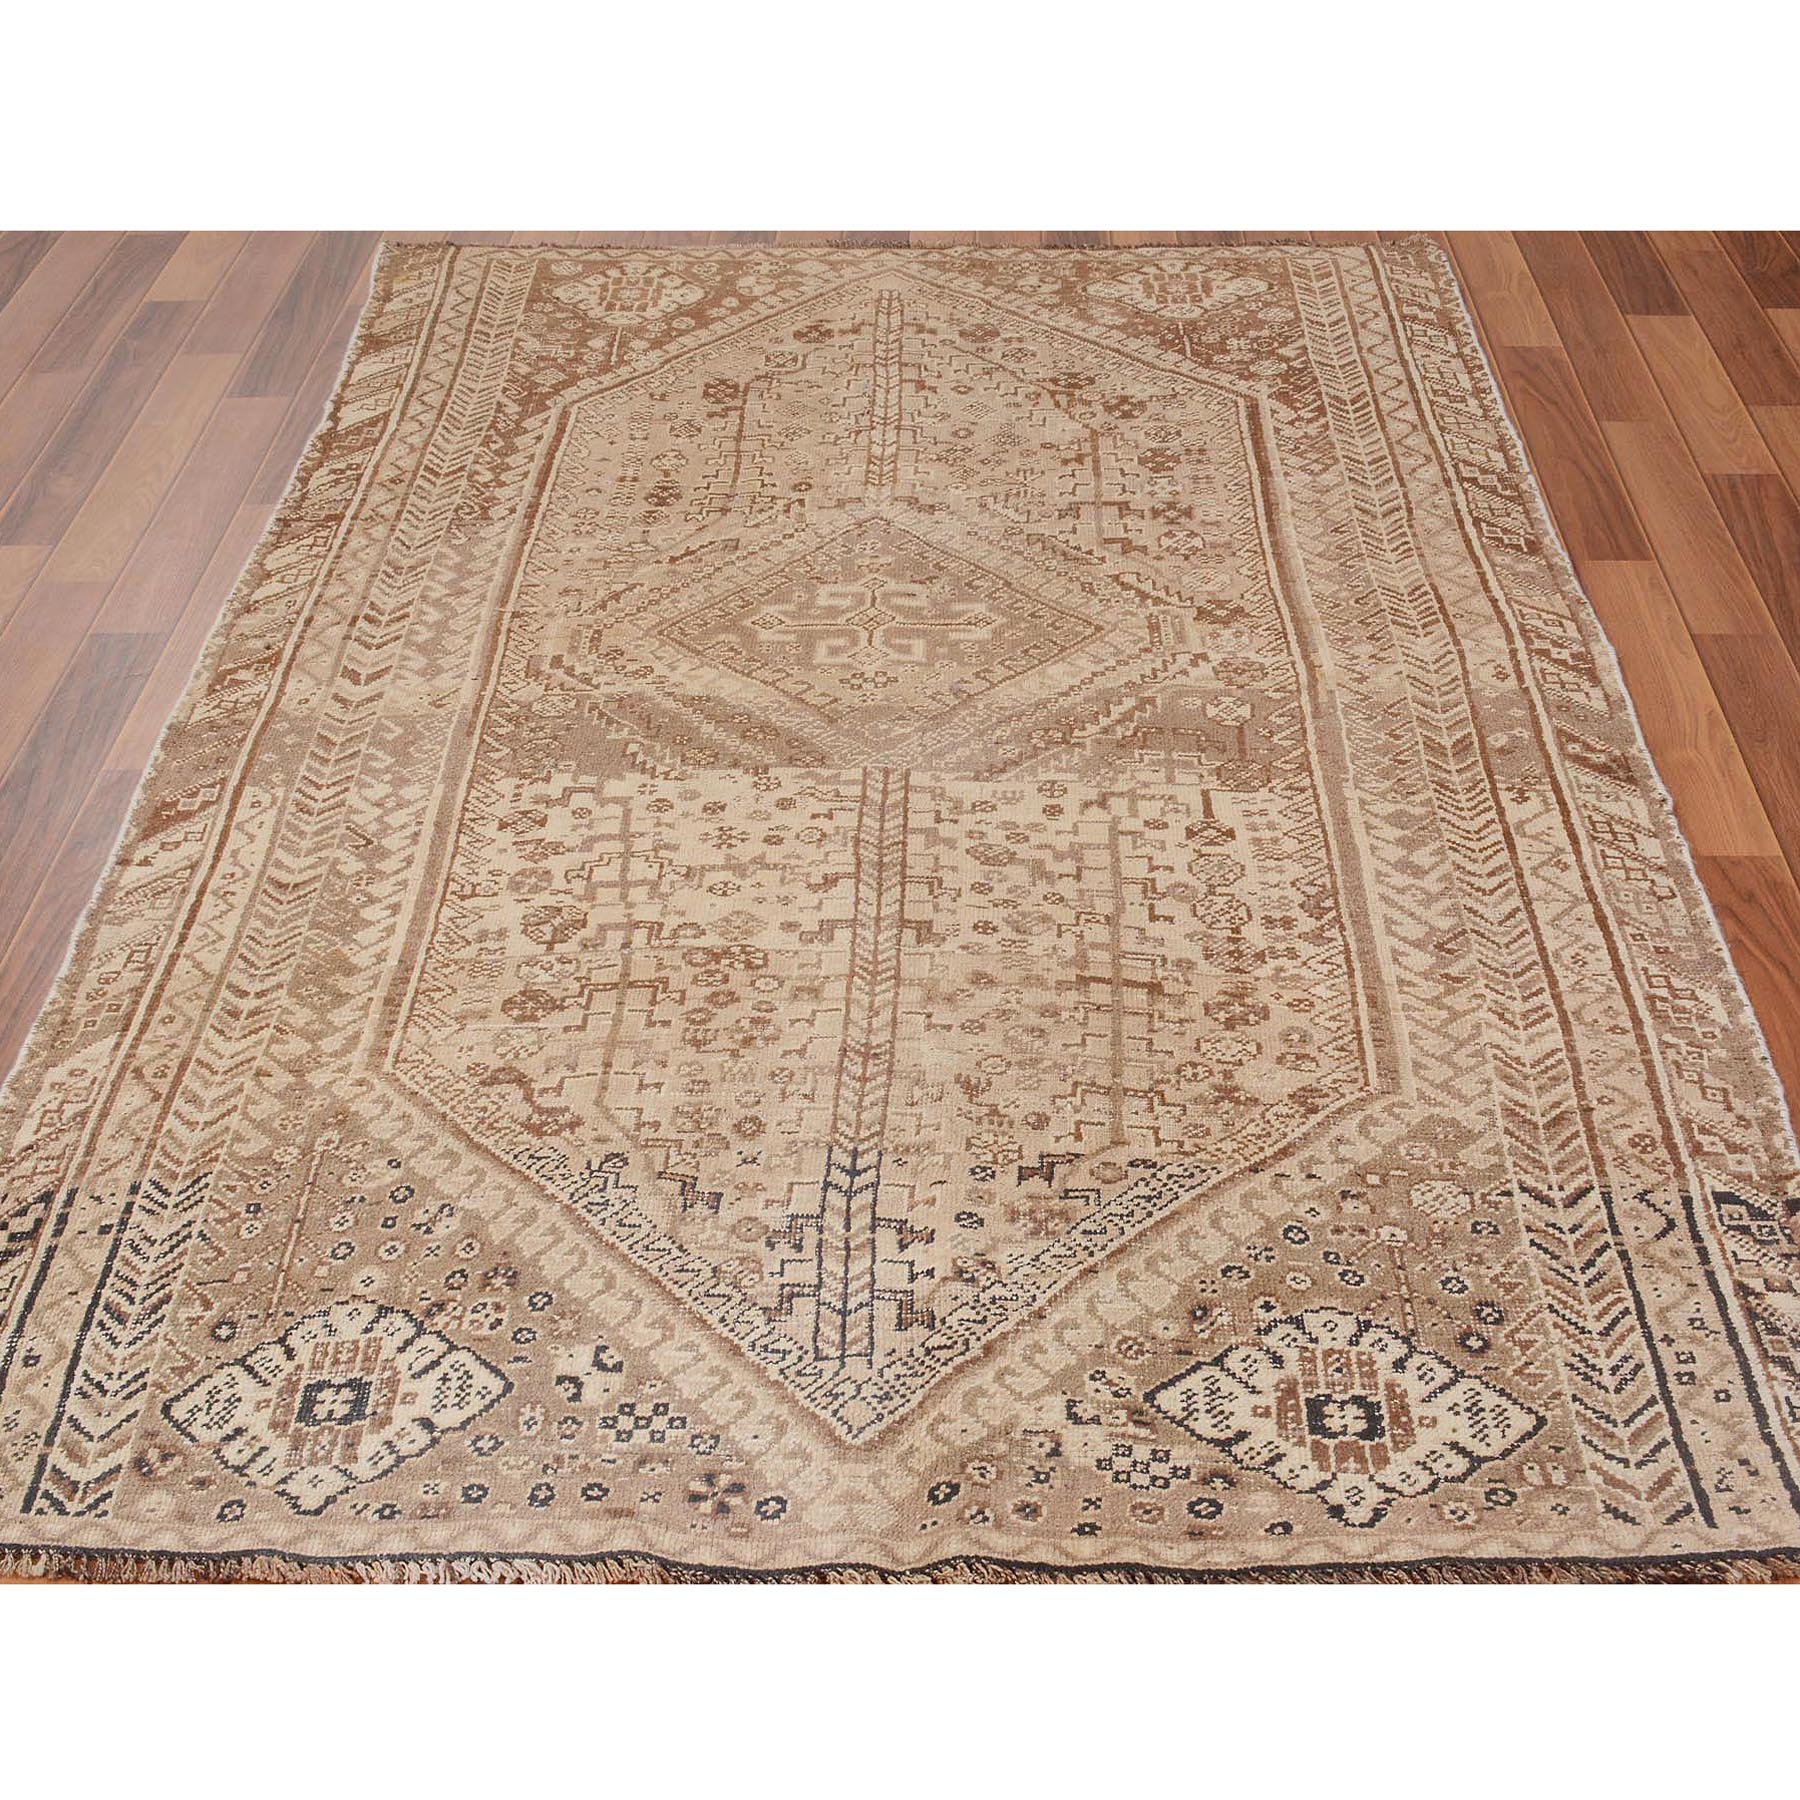 4-9 x7-2  Natural Colors Old and Worn Down Persian Shiraz Hand Knotted Oriental Rug 